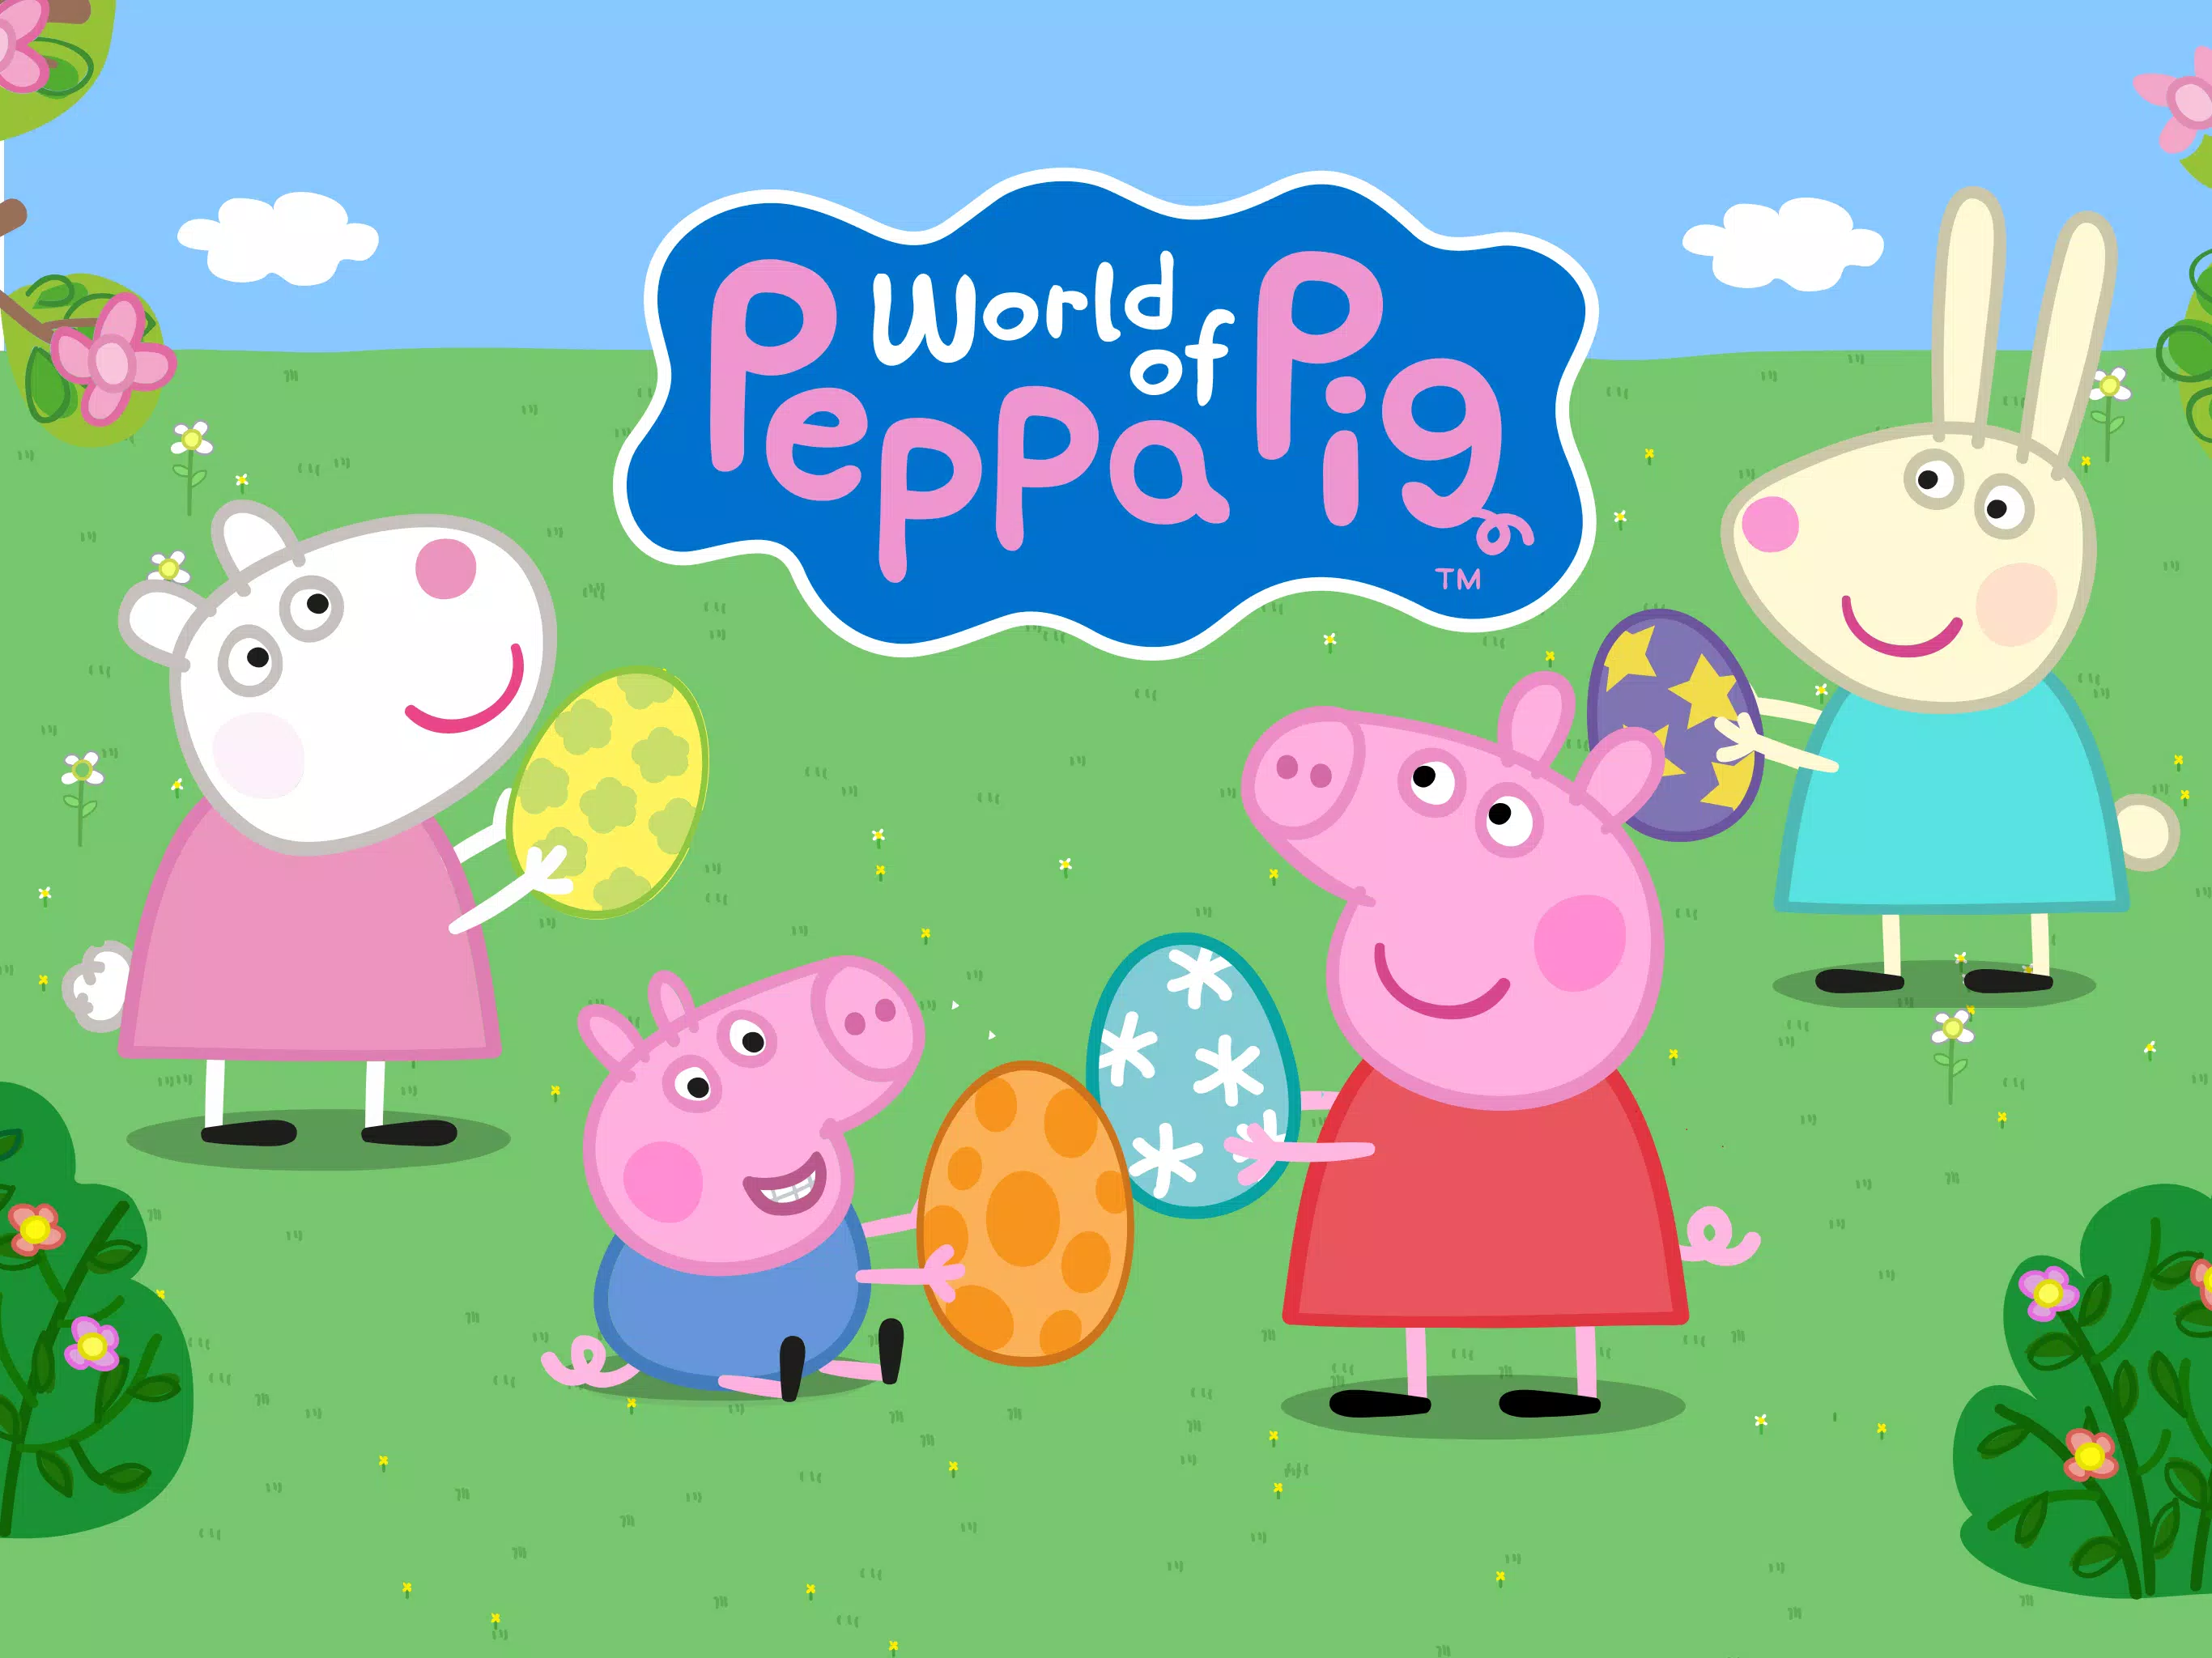 World of Peppa Pig: Kids Games for Android - APK Download